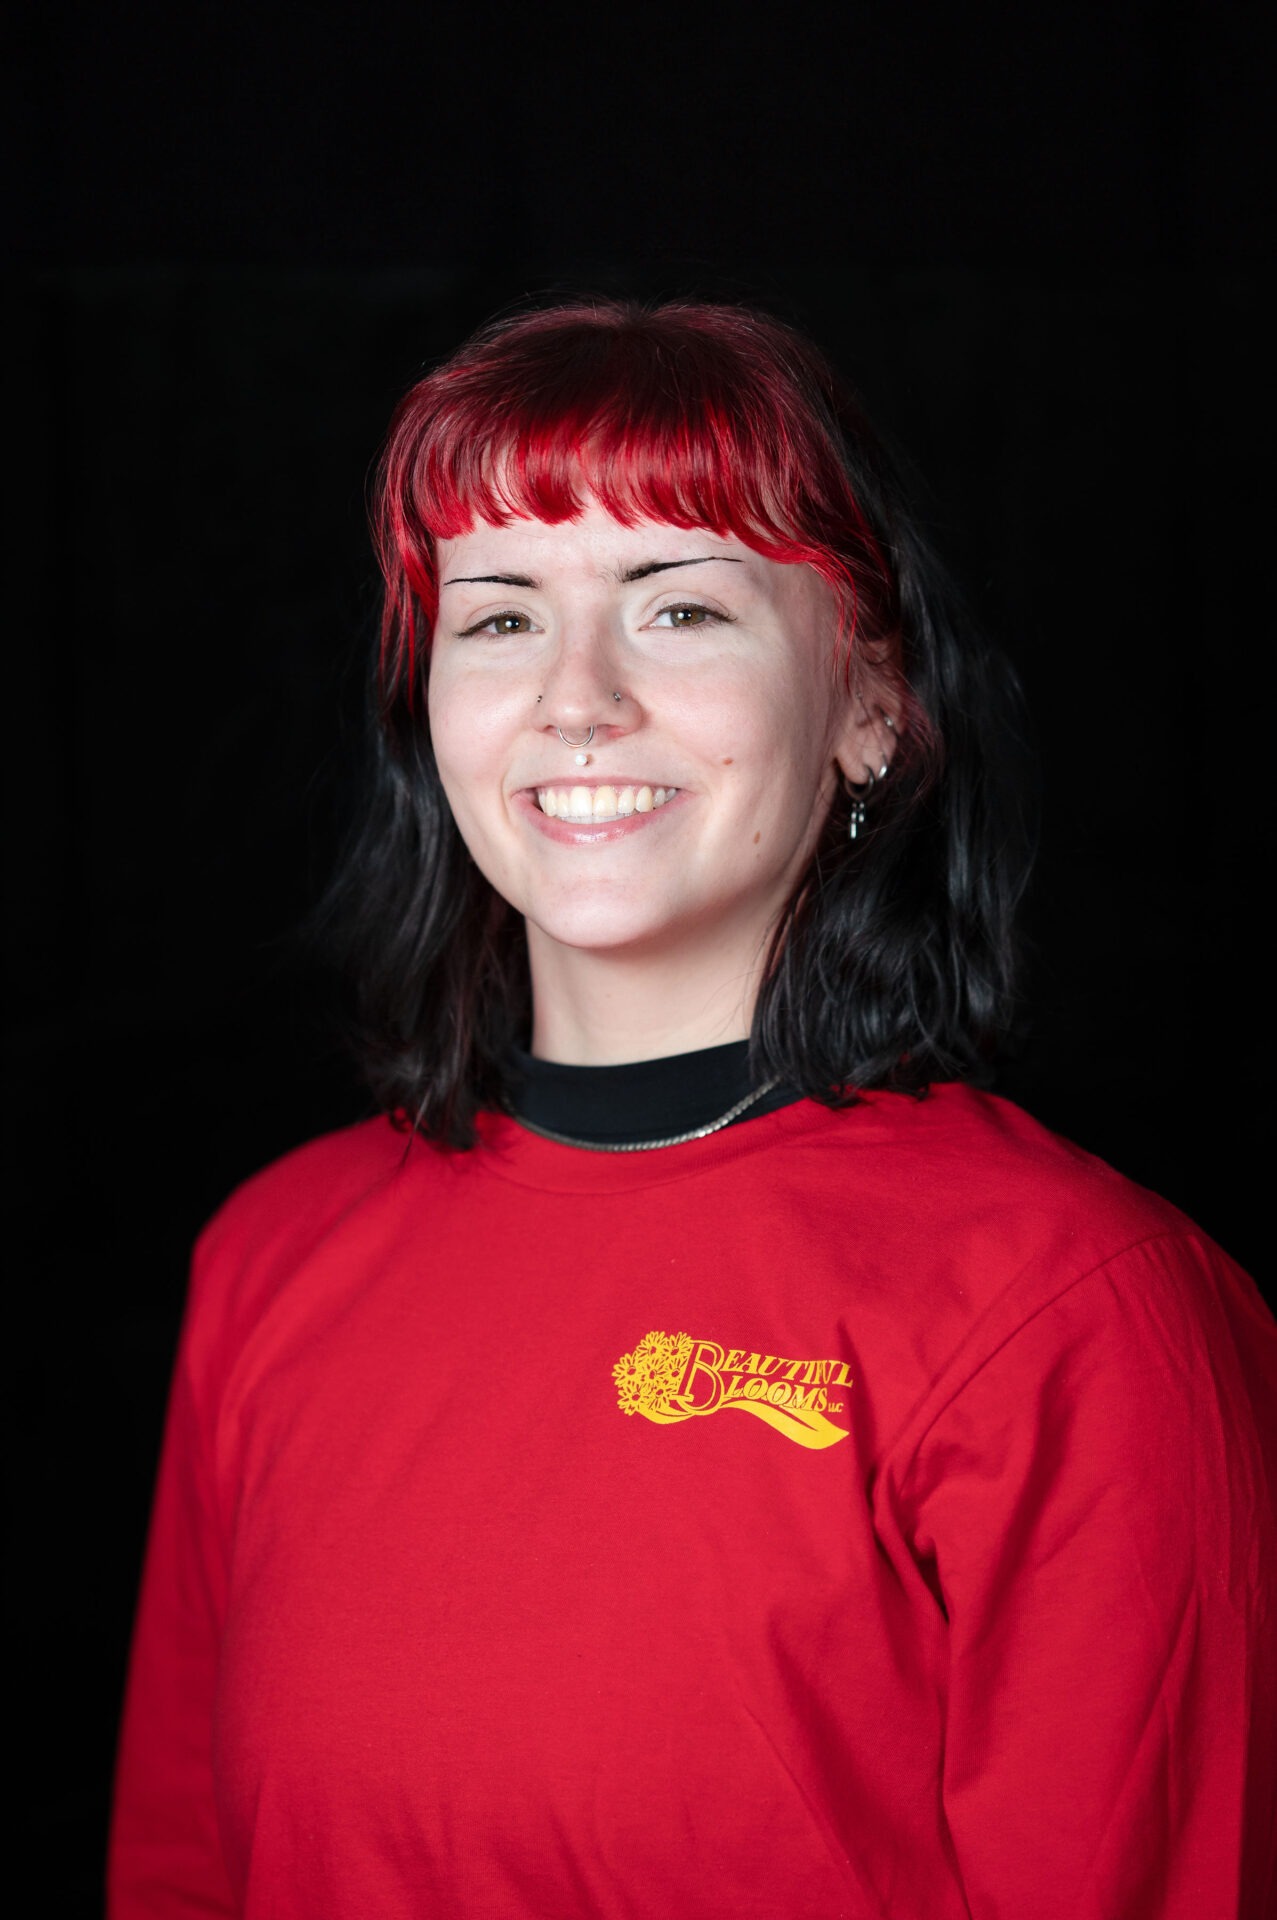 A person with bright red hair and a nose piercing is smiling, wearing a red shirt with "Beautiful Blooms" printed on it, against a black background.